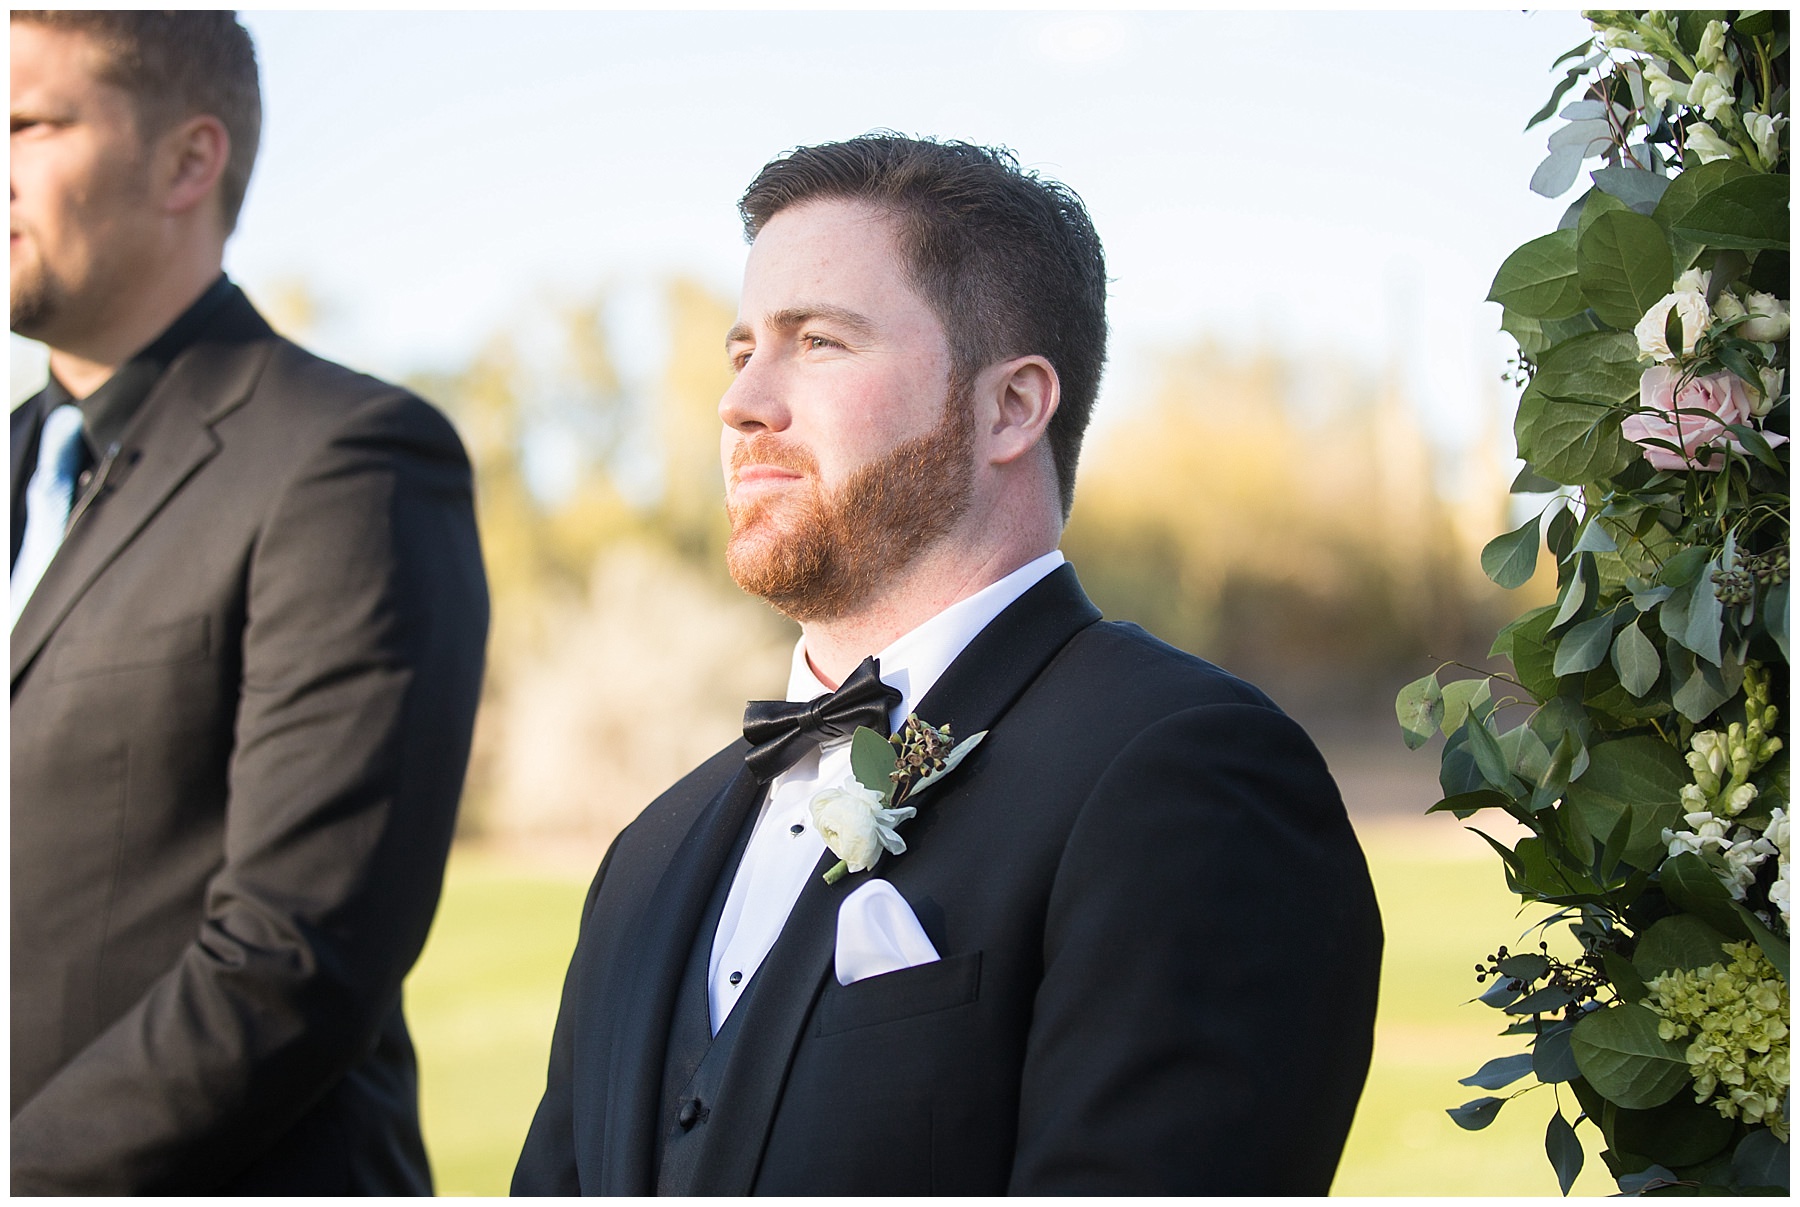 Groom Waiting for Bride to walk down aisle